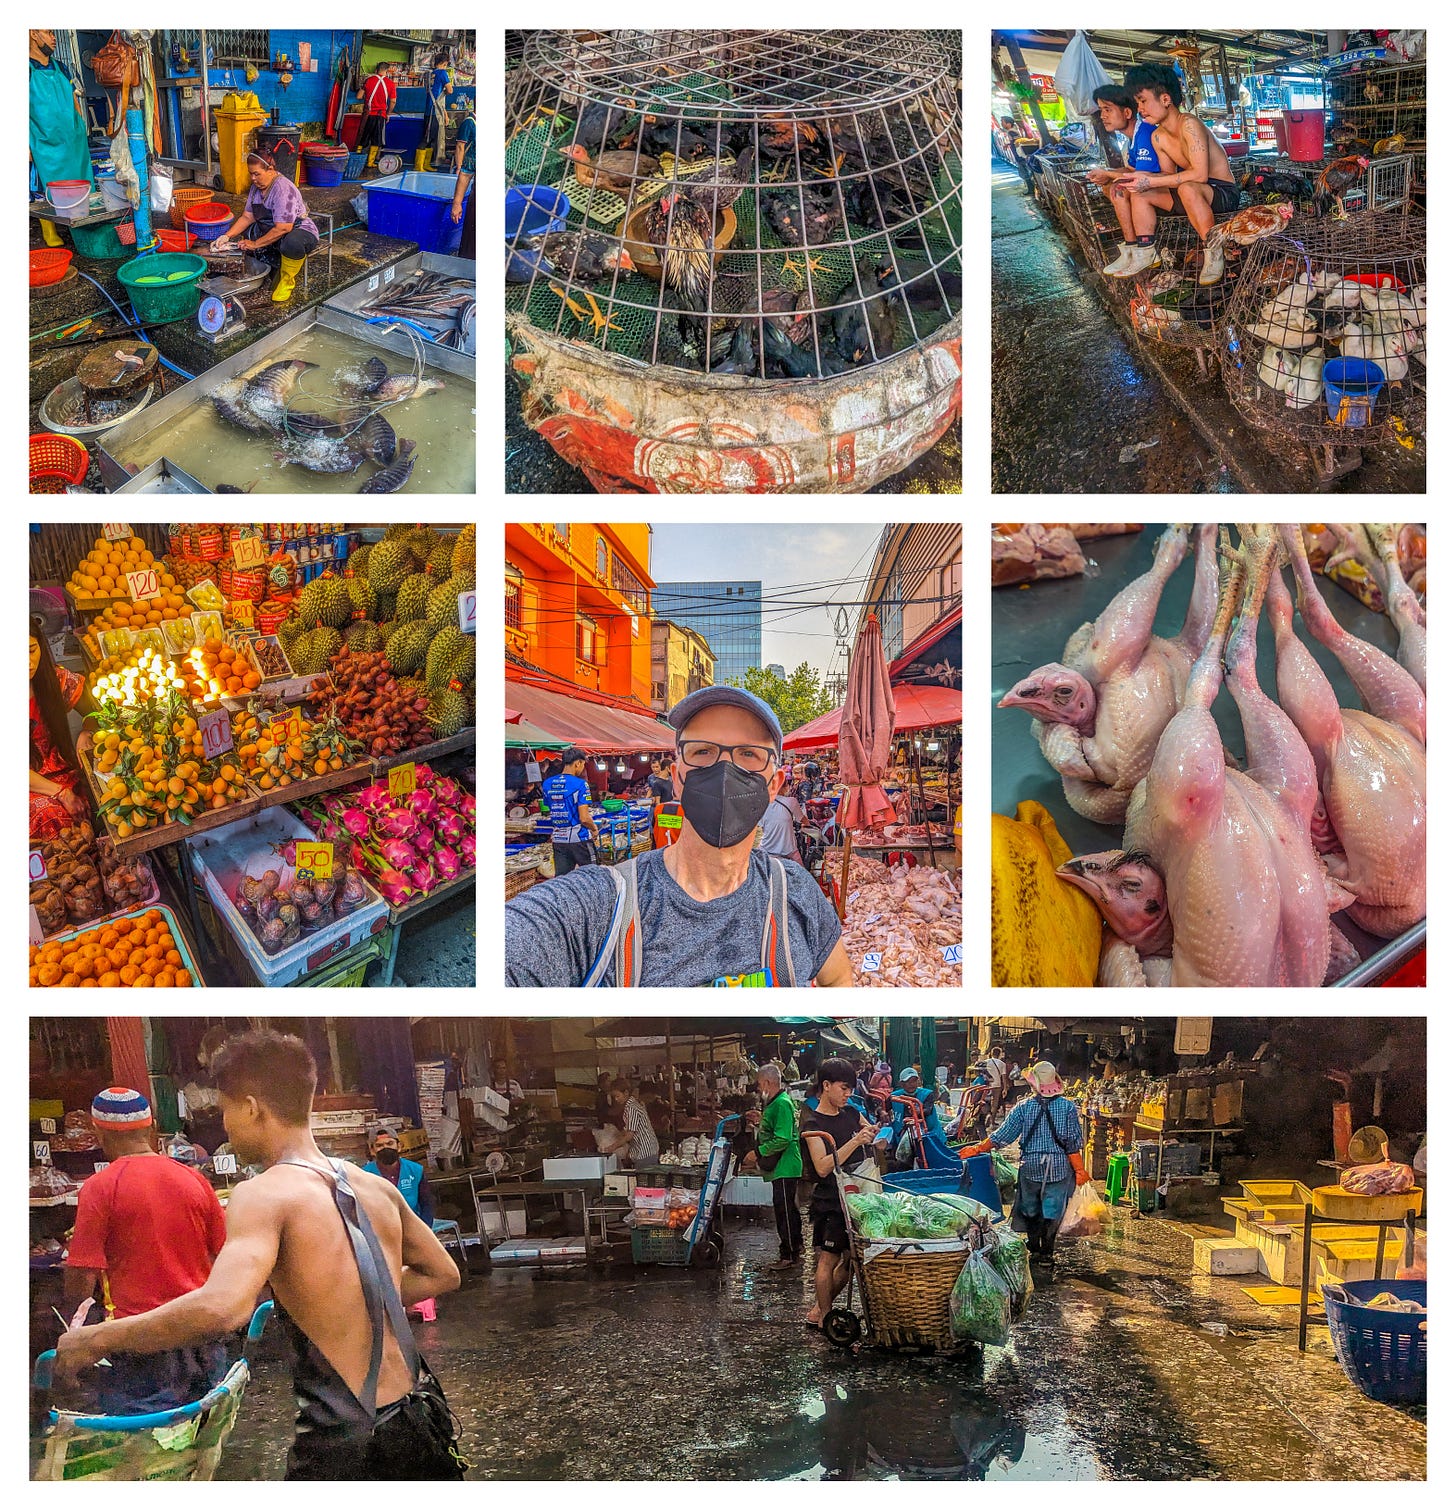 A compilation of photos showing chickens waiting to be slaughtered, as well as plucked chickens for sale, piles fruit, a fishmonger scaling a fish, me standing in the middle of the market, and a young man pushing a cart. 